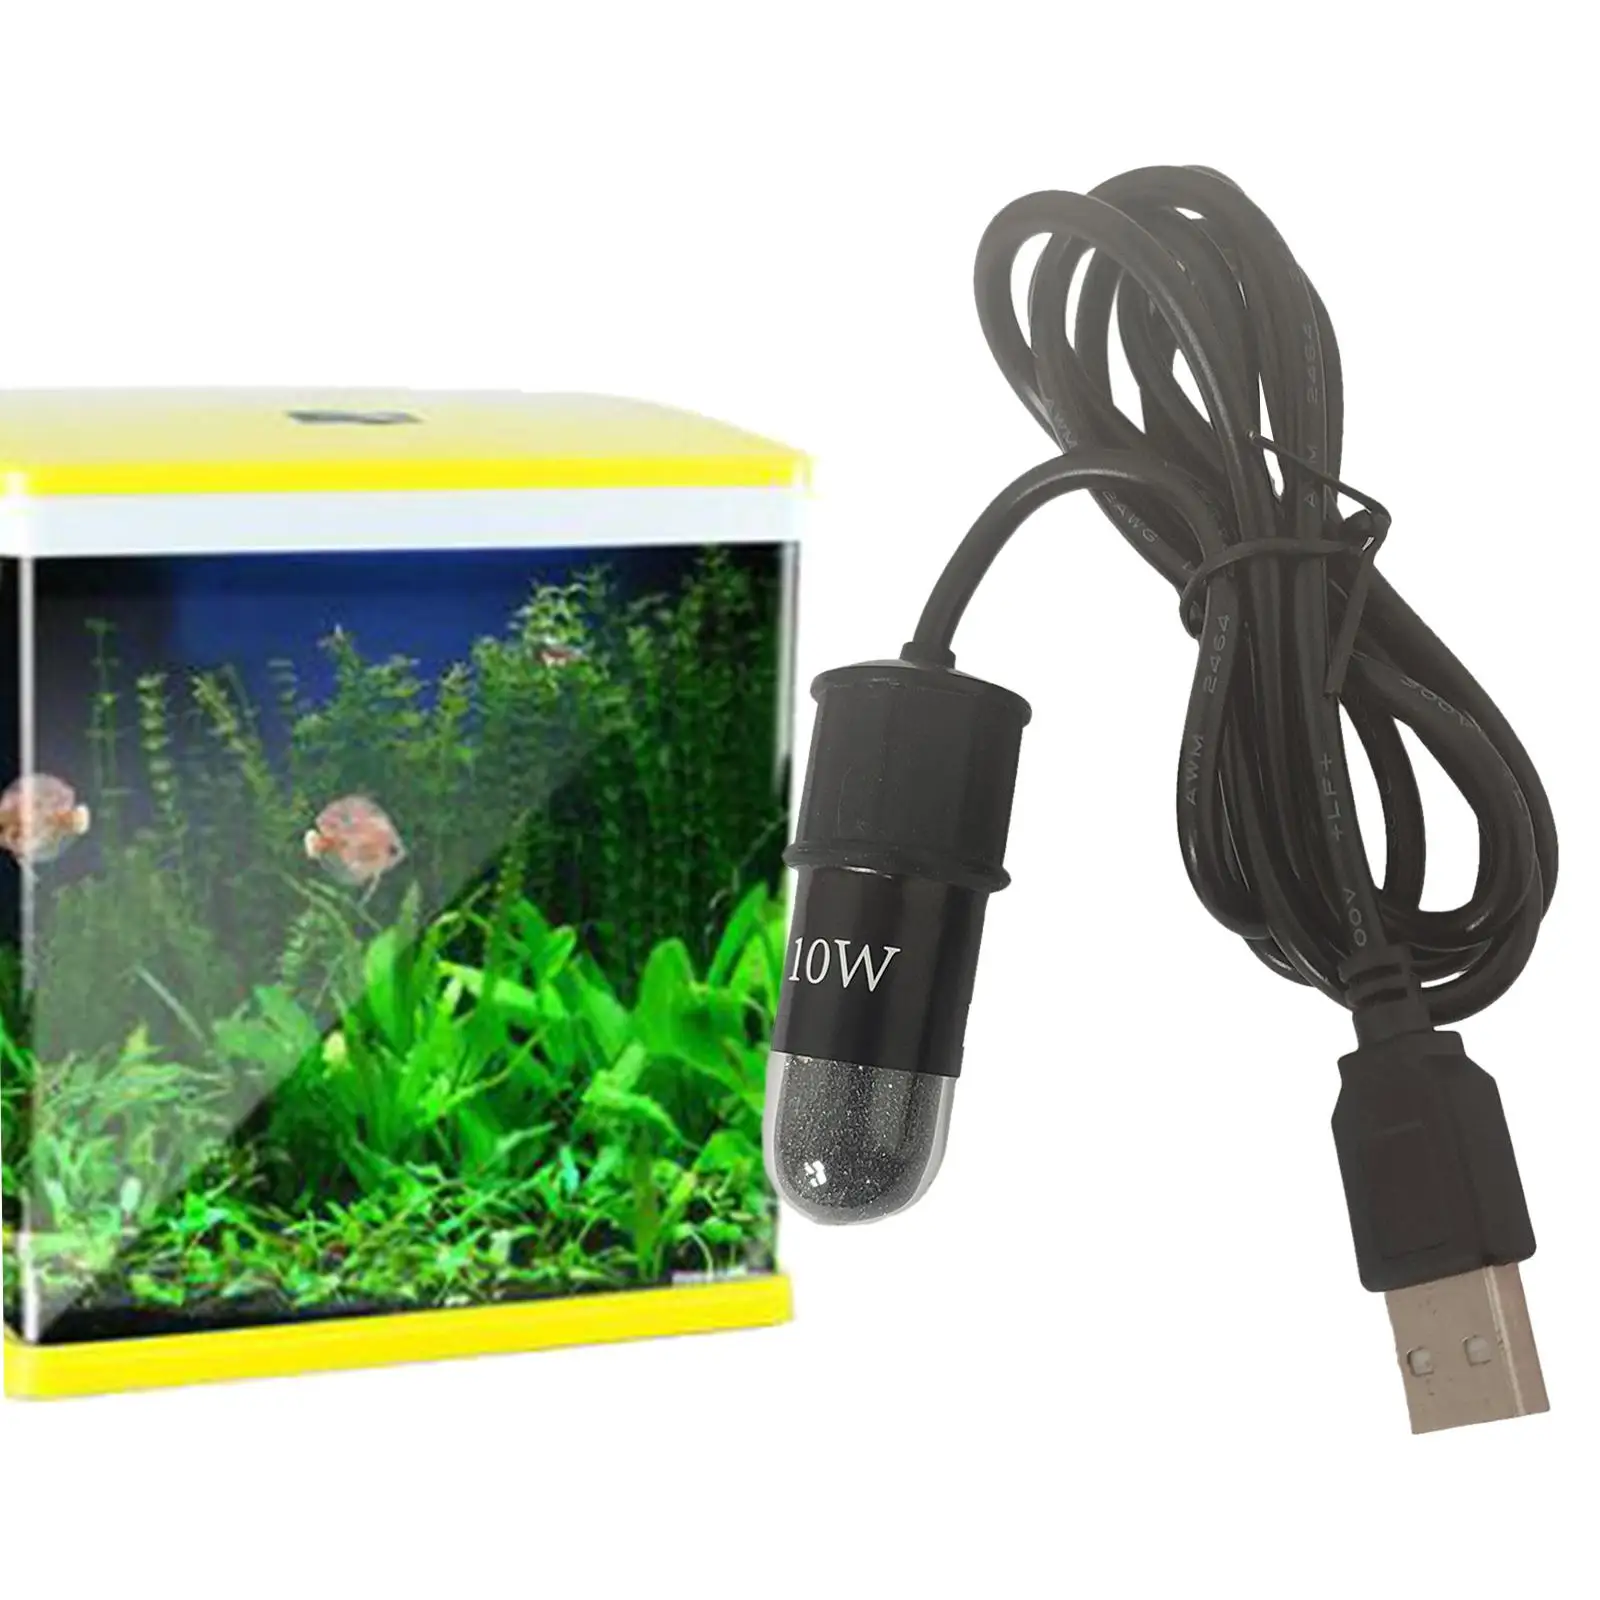 10W Mini Fish Tank Heater with Built in Thermometer Heater